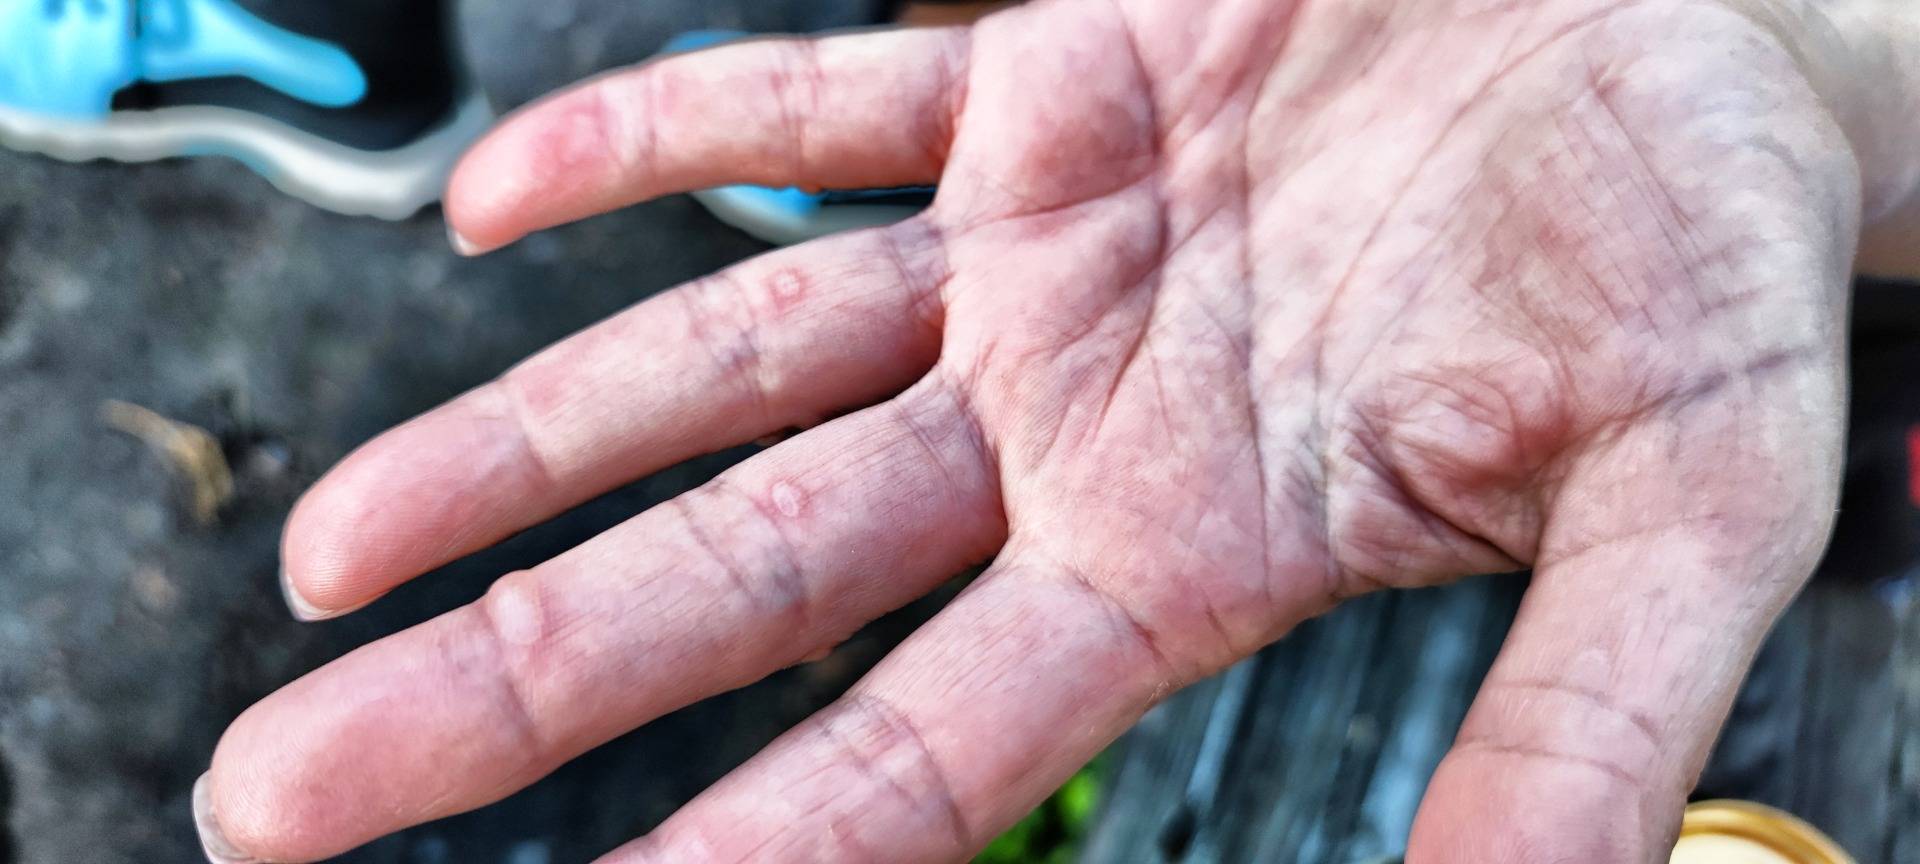 After a few days some hands are looking like this. Ouch.